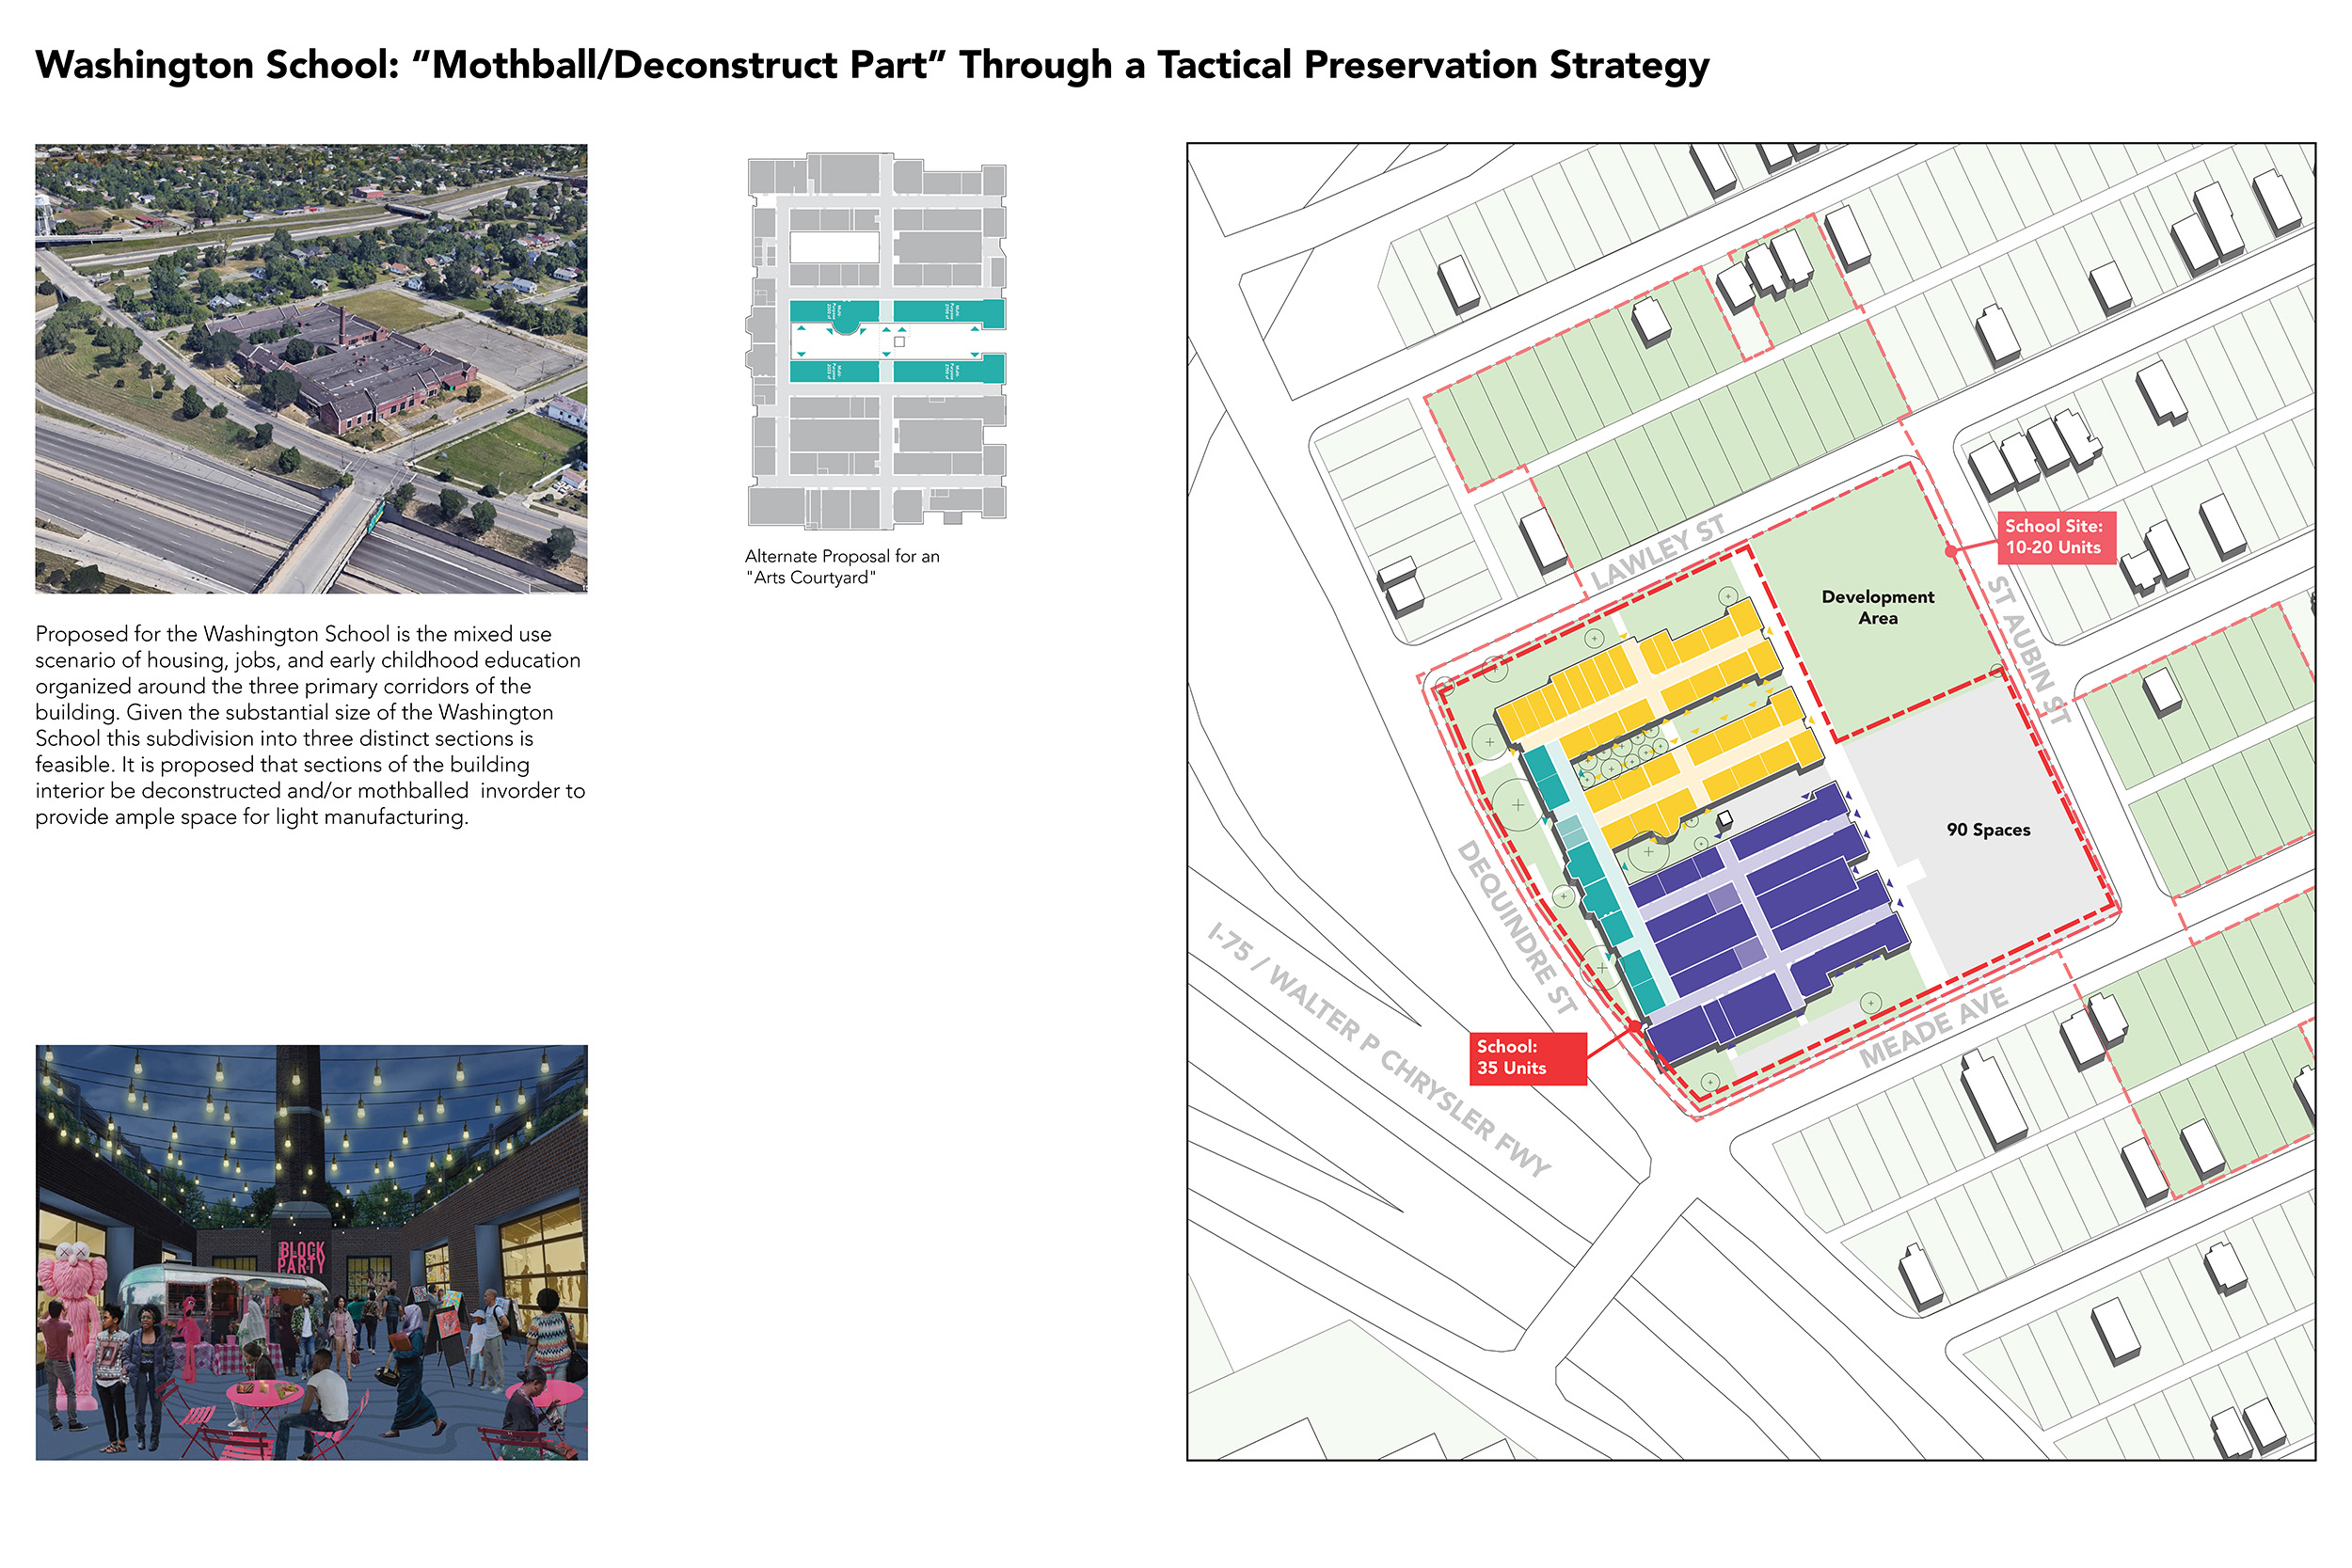 A diagram mapping the tactical preservation strategy of Washington School in Detroit, MI.